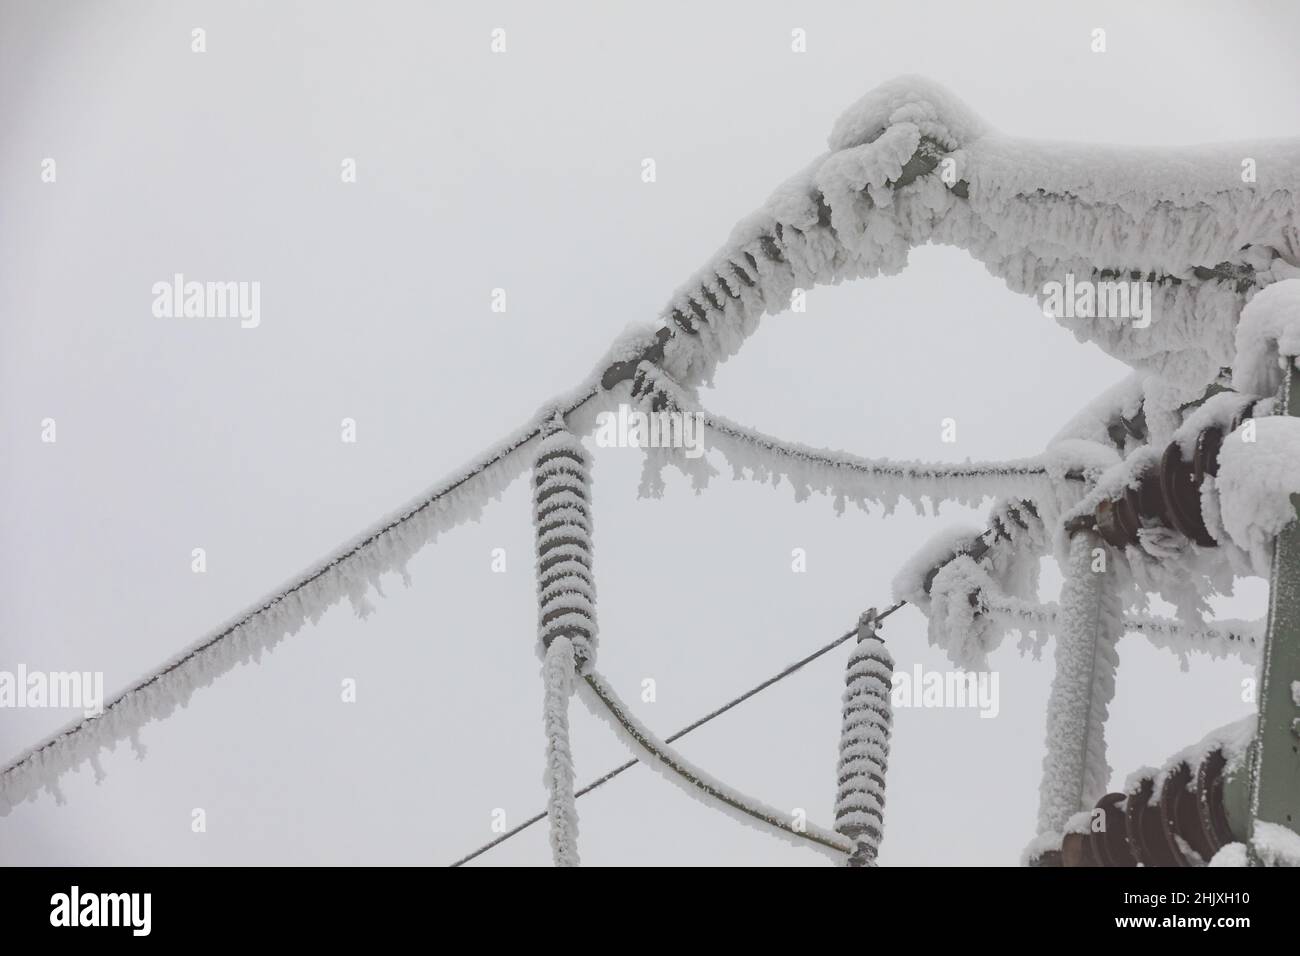 Frozen power line pylons. Hoarfrost on high voltage cables and pylons. Winter in the mountains. Stock Photo